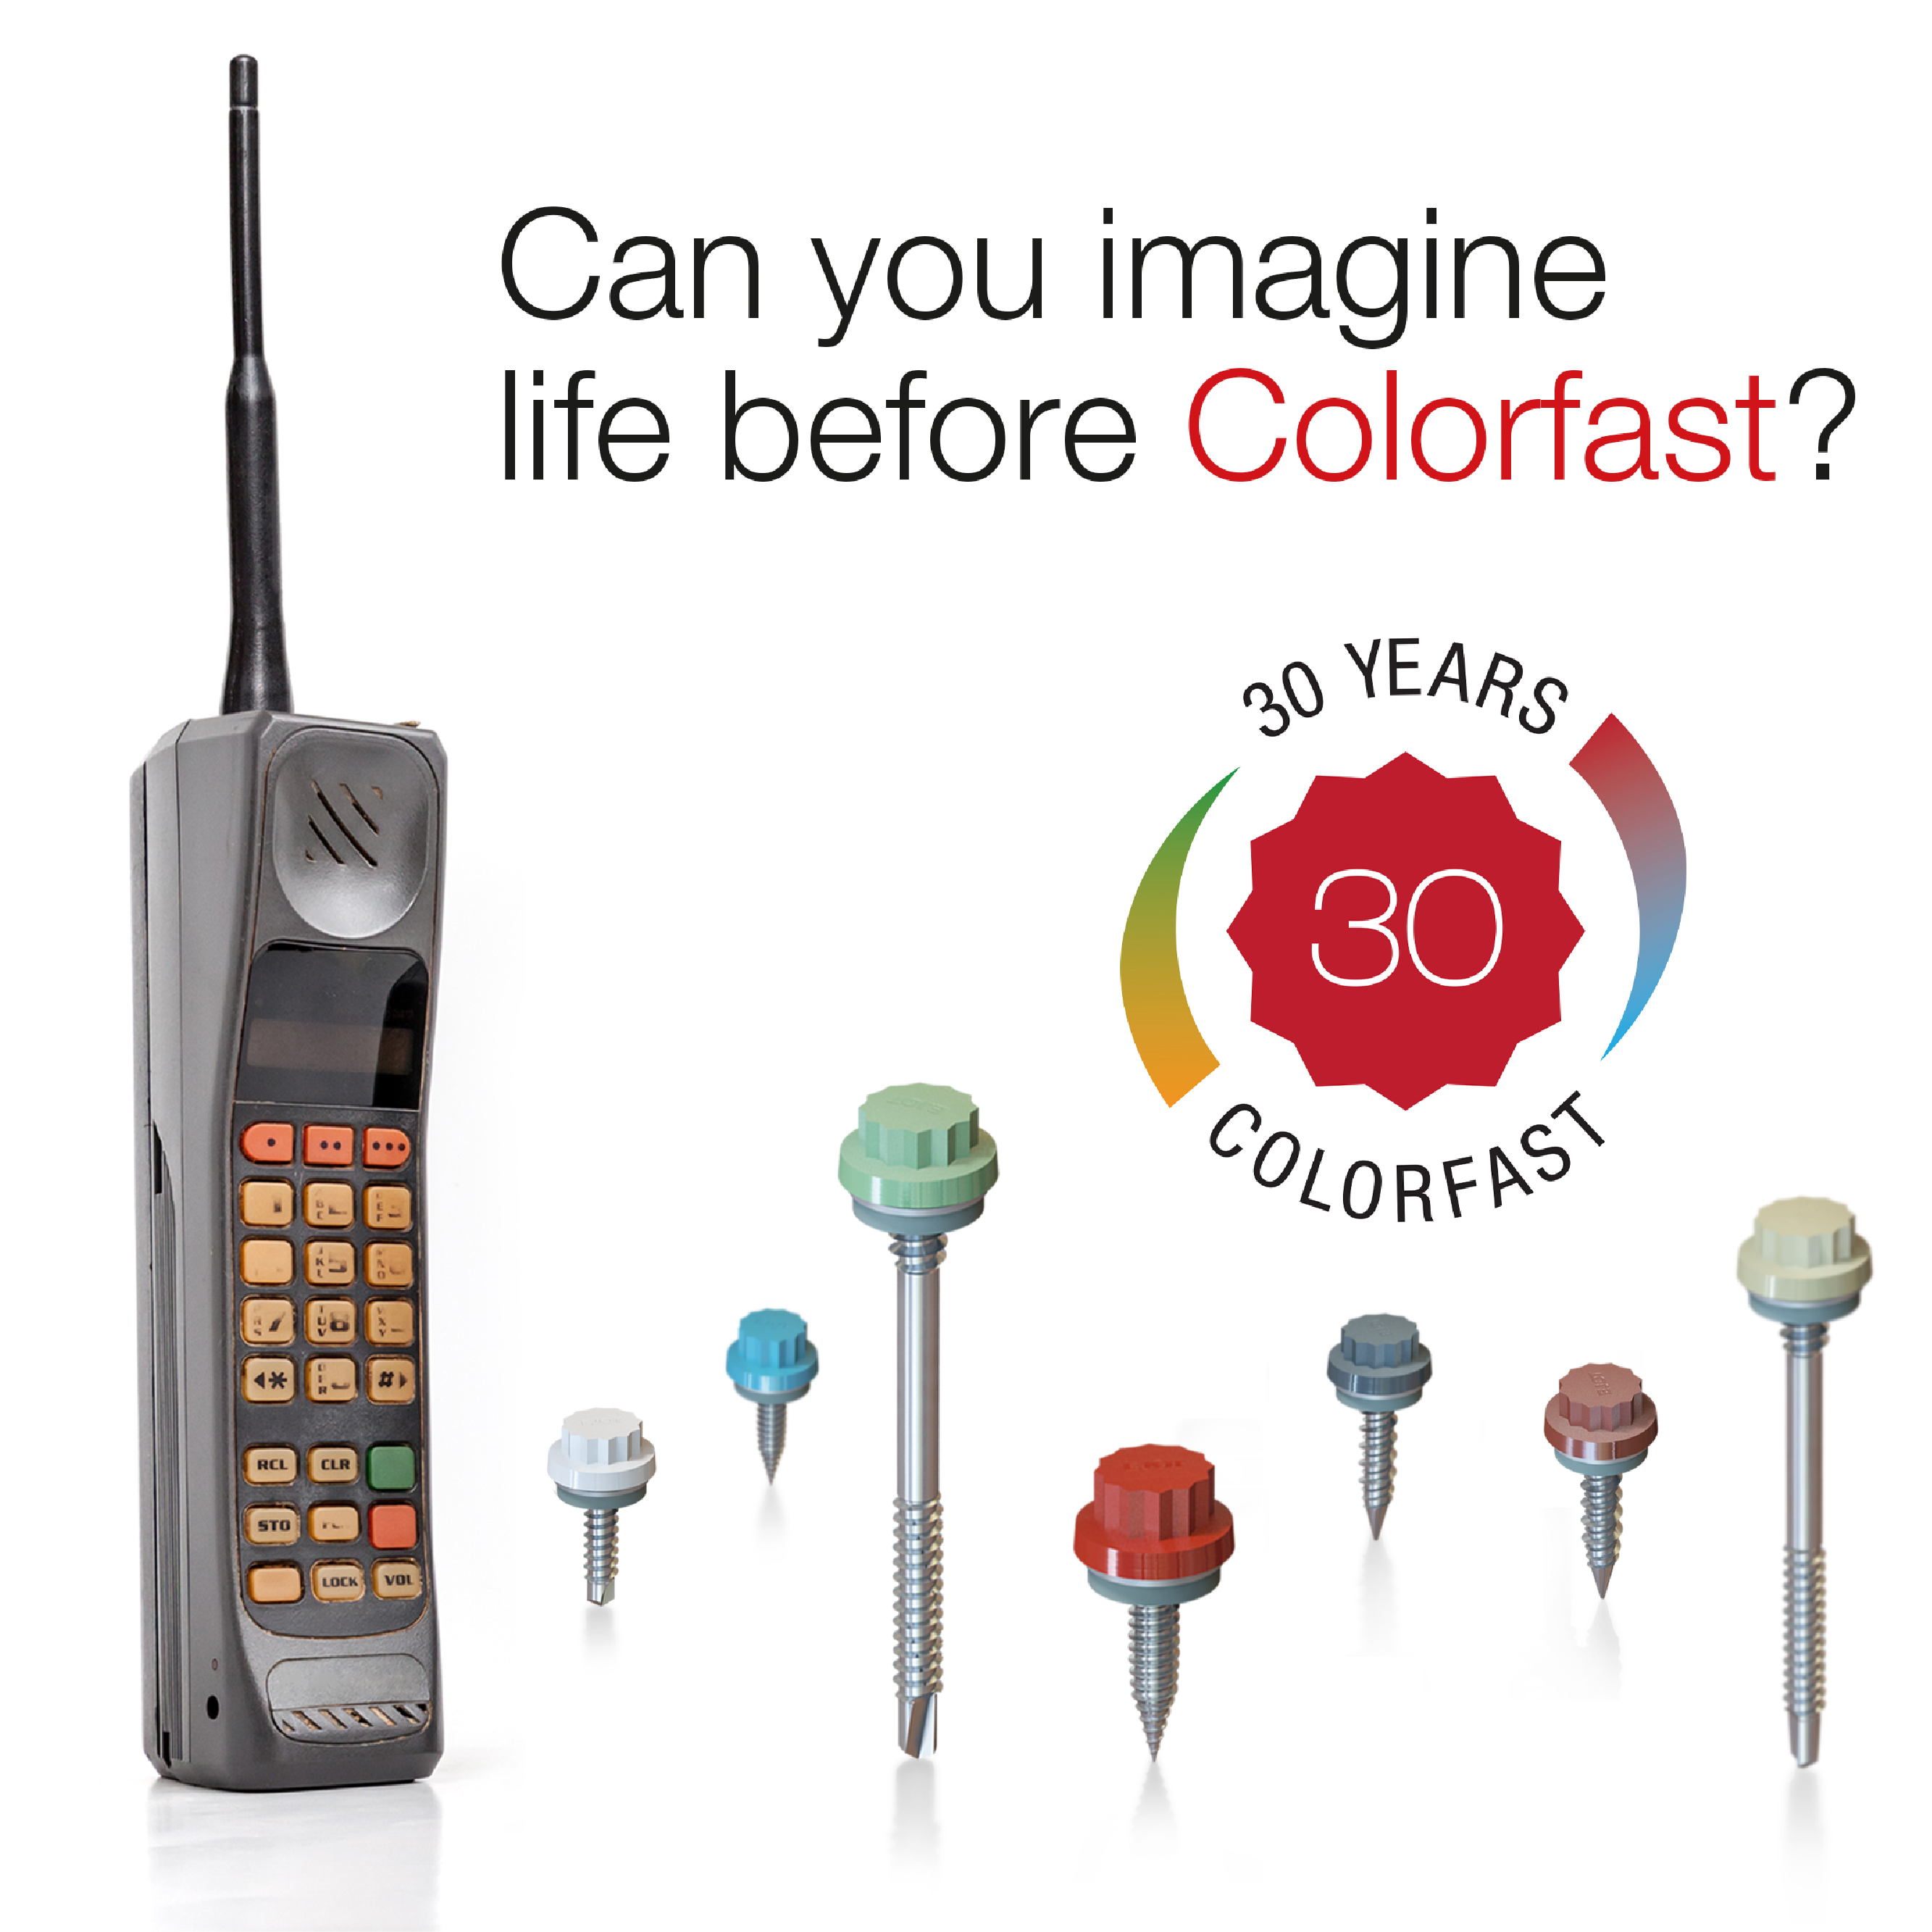 Colorfast - 640 x 640.png